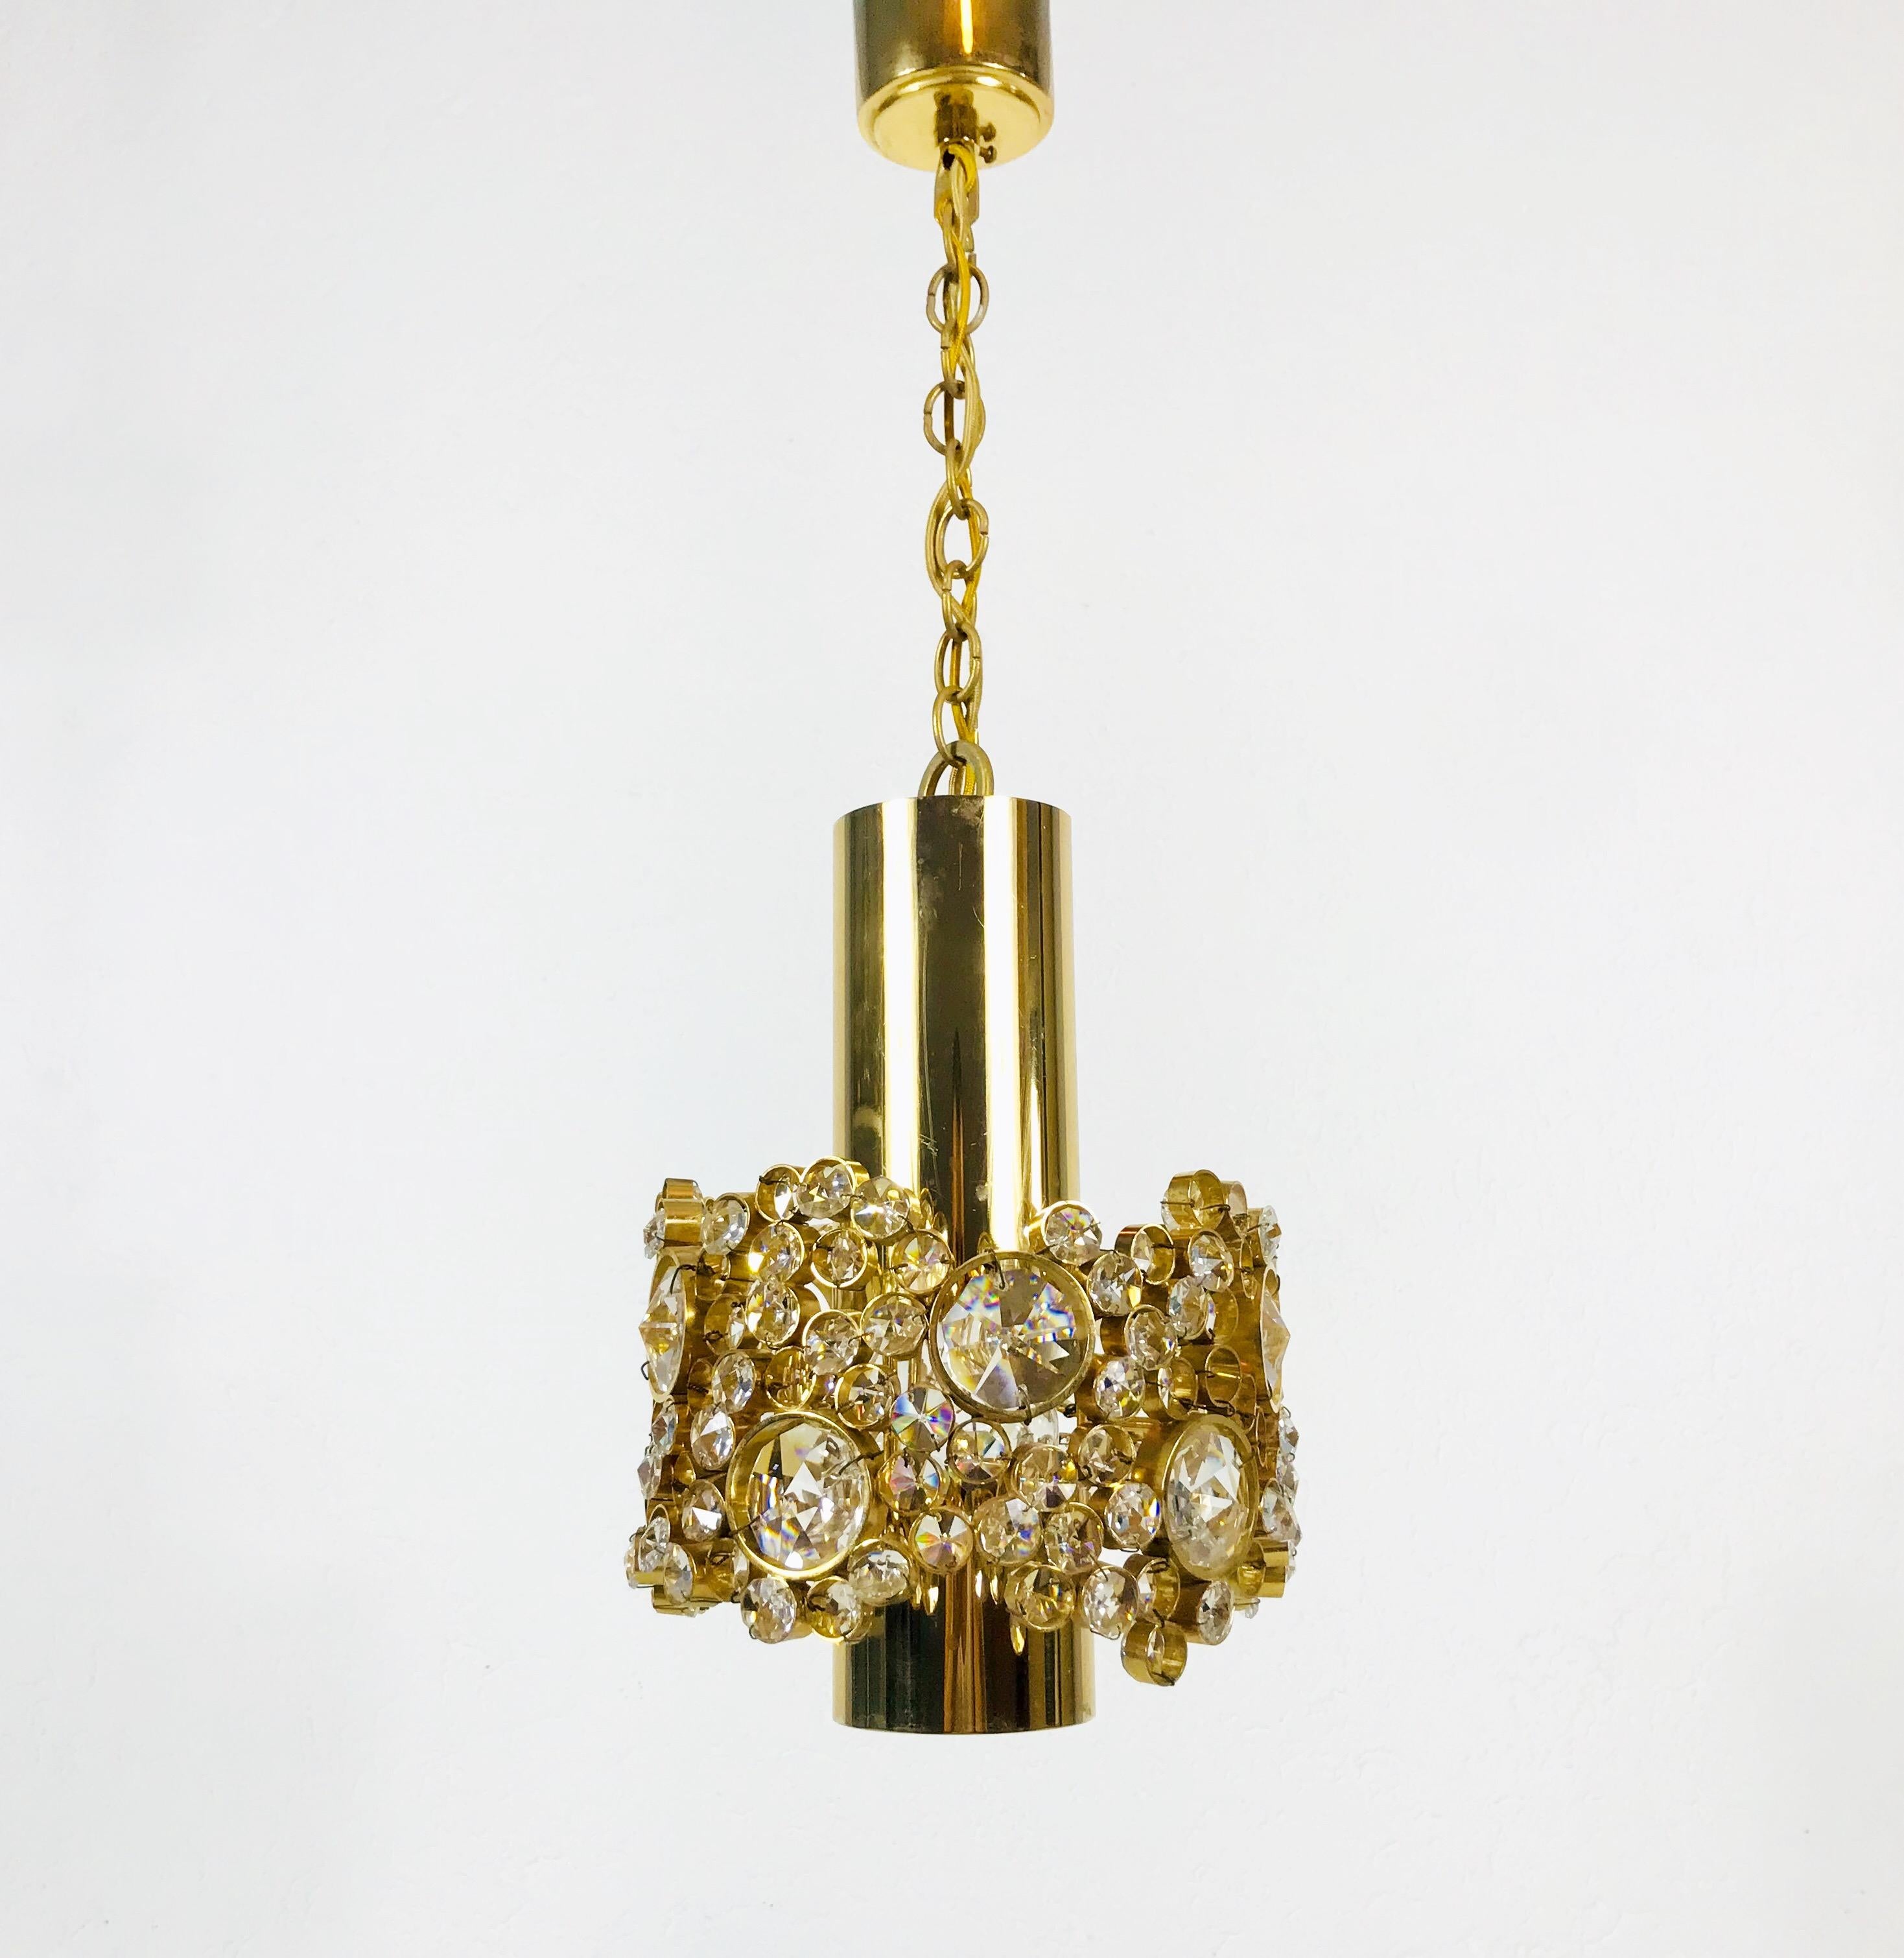 Pair of Gilt Brass and Crystal Glass Chandeliers by Palwa, Germany, 1970s For Sale 10